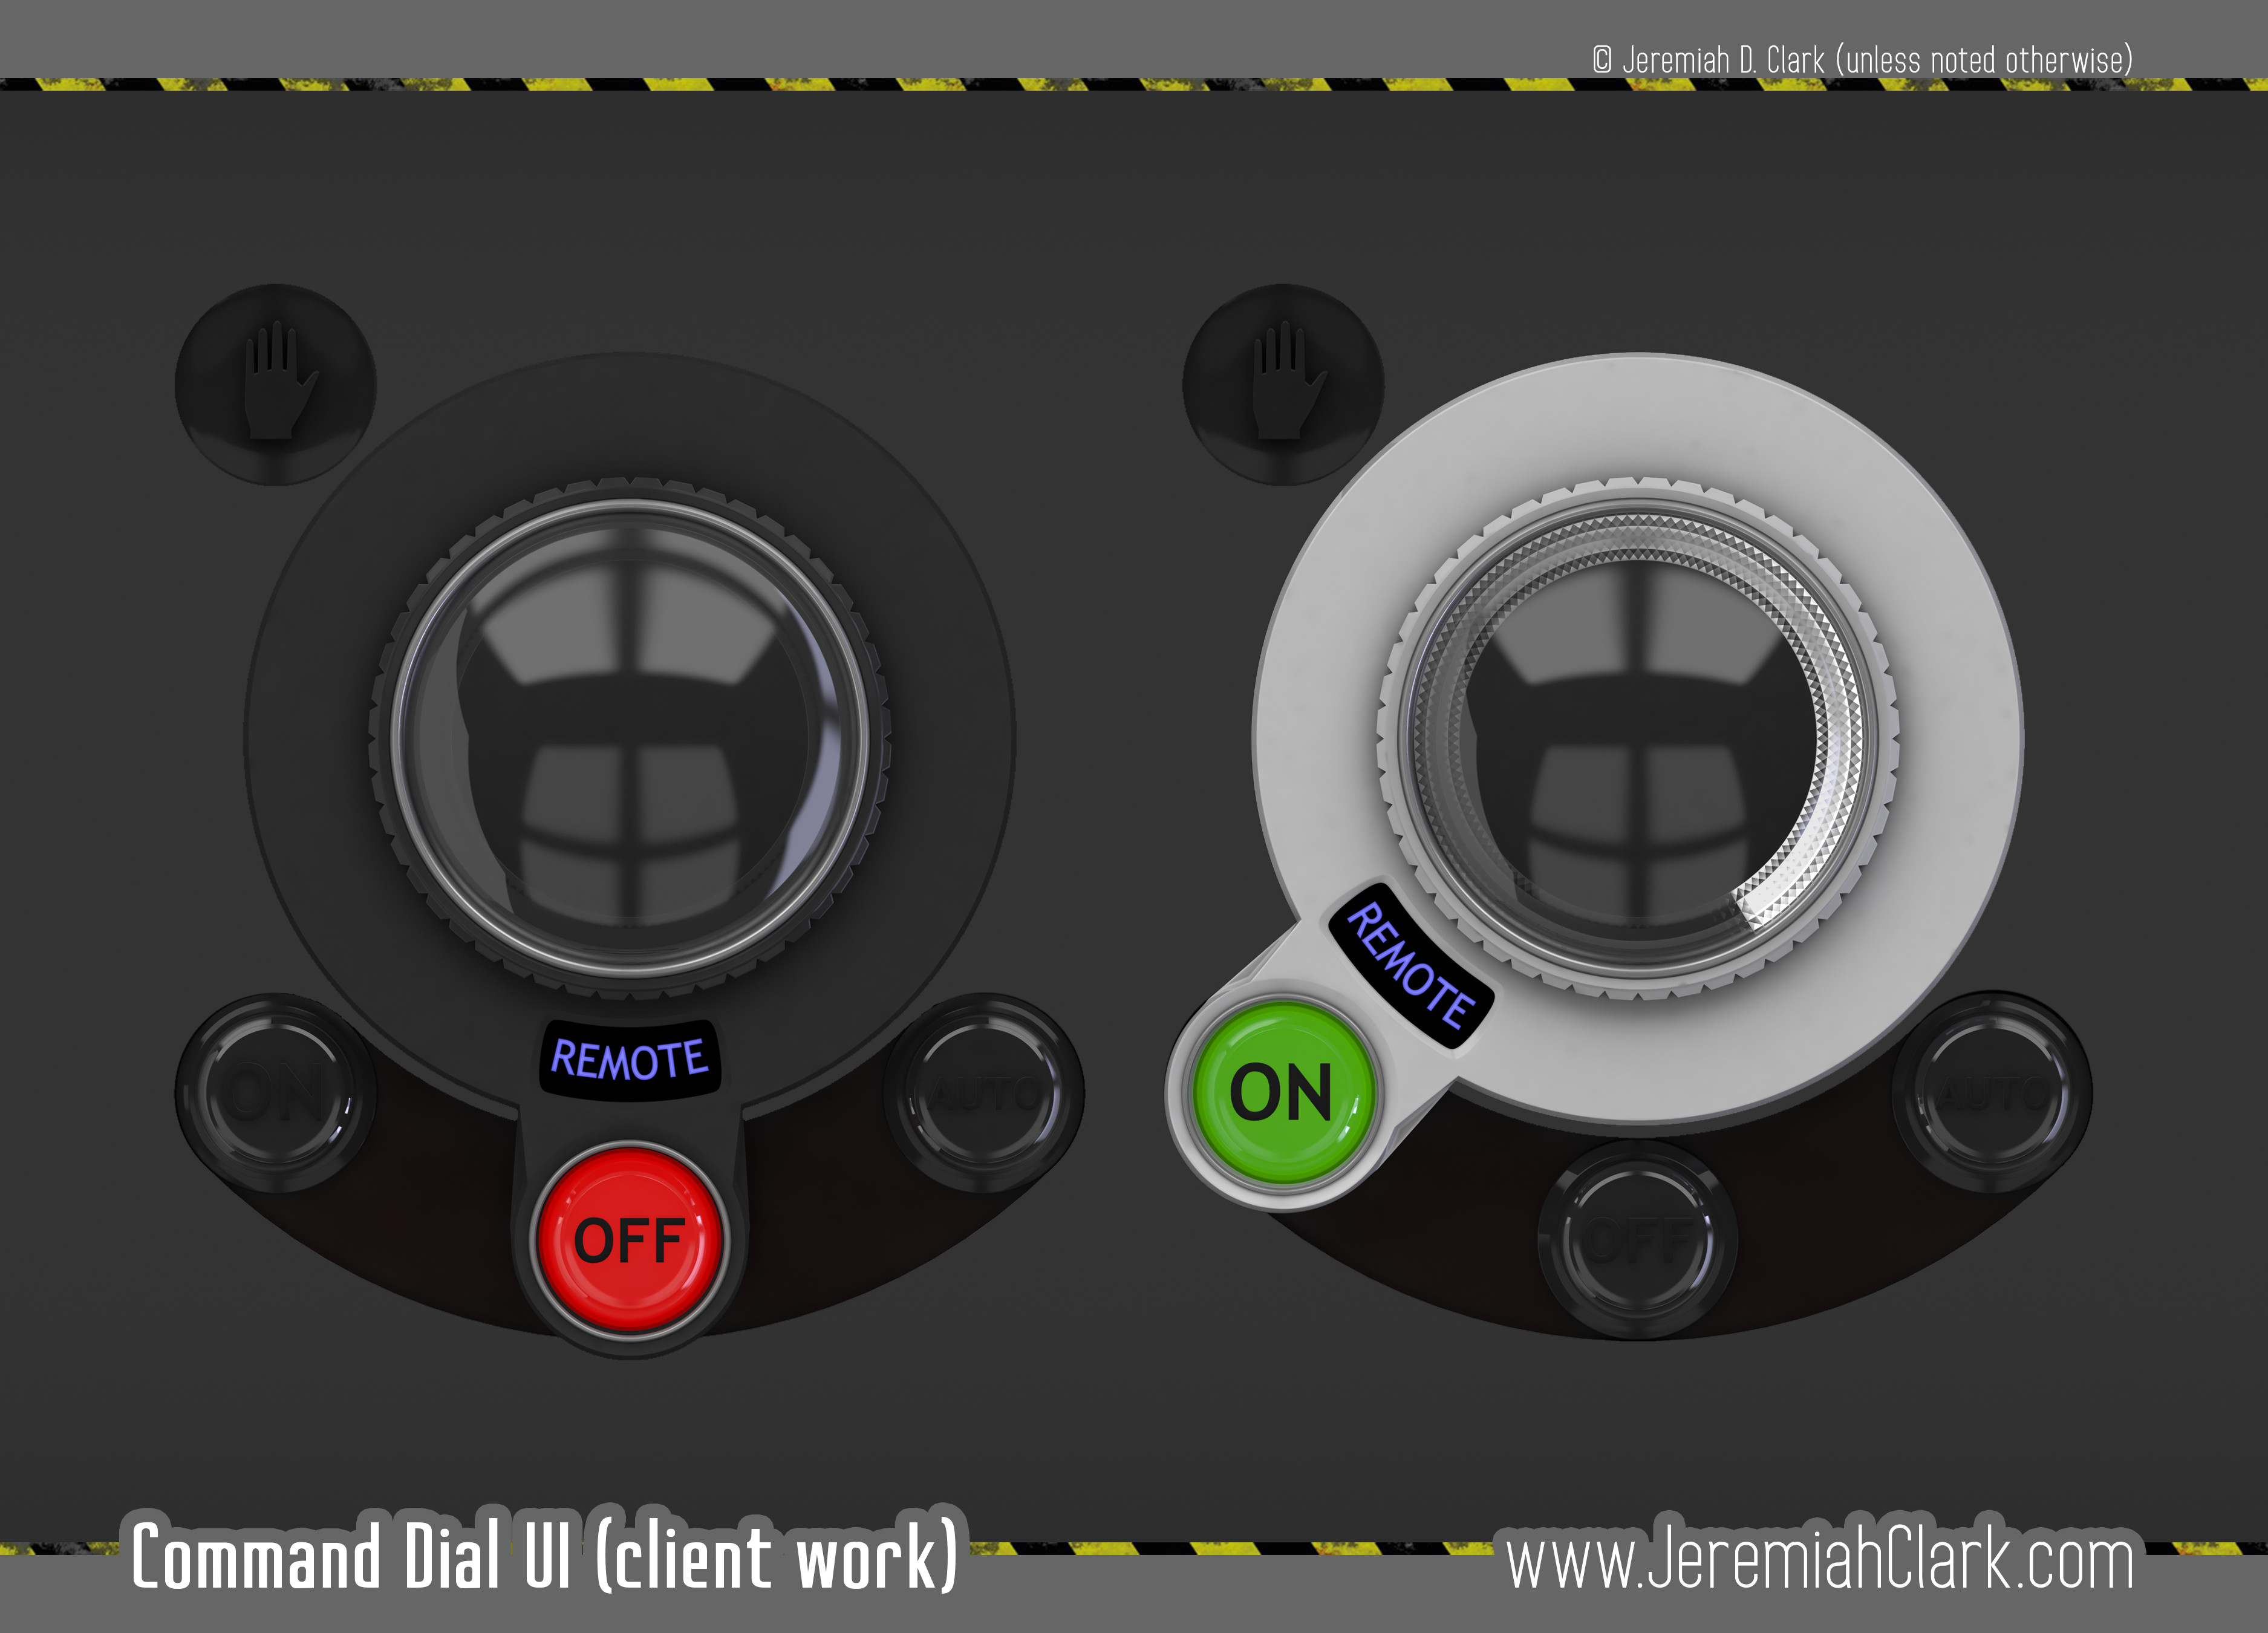 The final version of the command dial (so far). Shown here are the running and stopped states. I'm especially happy with the diamond cut light ring, which took a lot to get just right.
Modeled and textured in 3Ds Max.
Rendered using V-Ray.